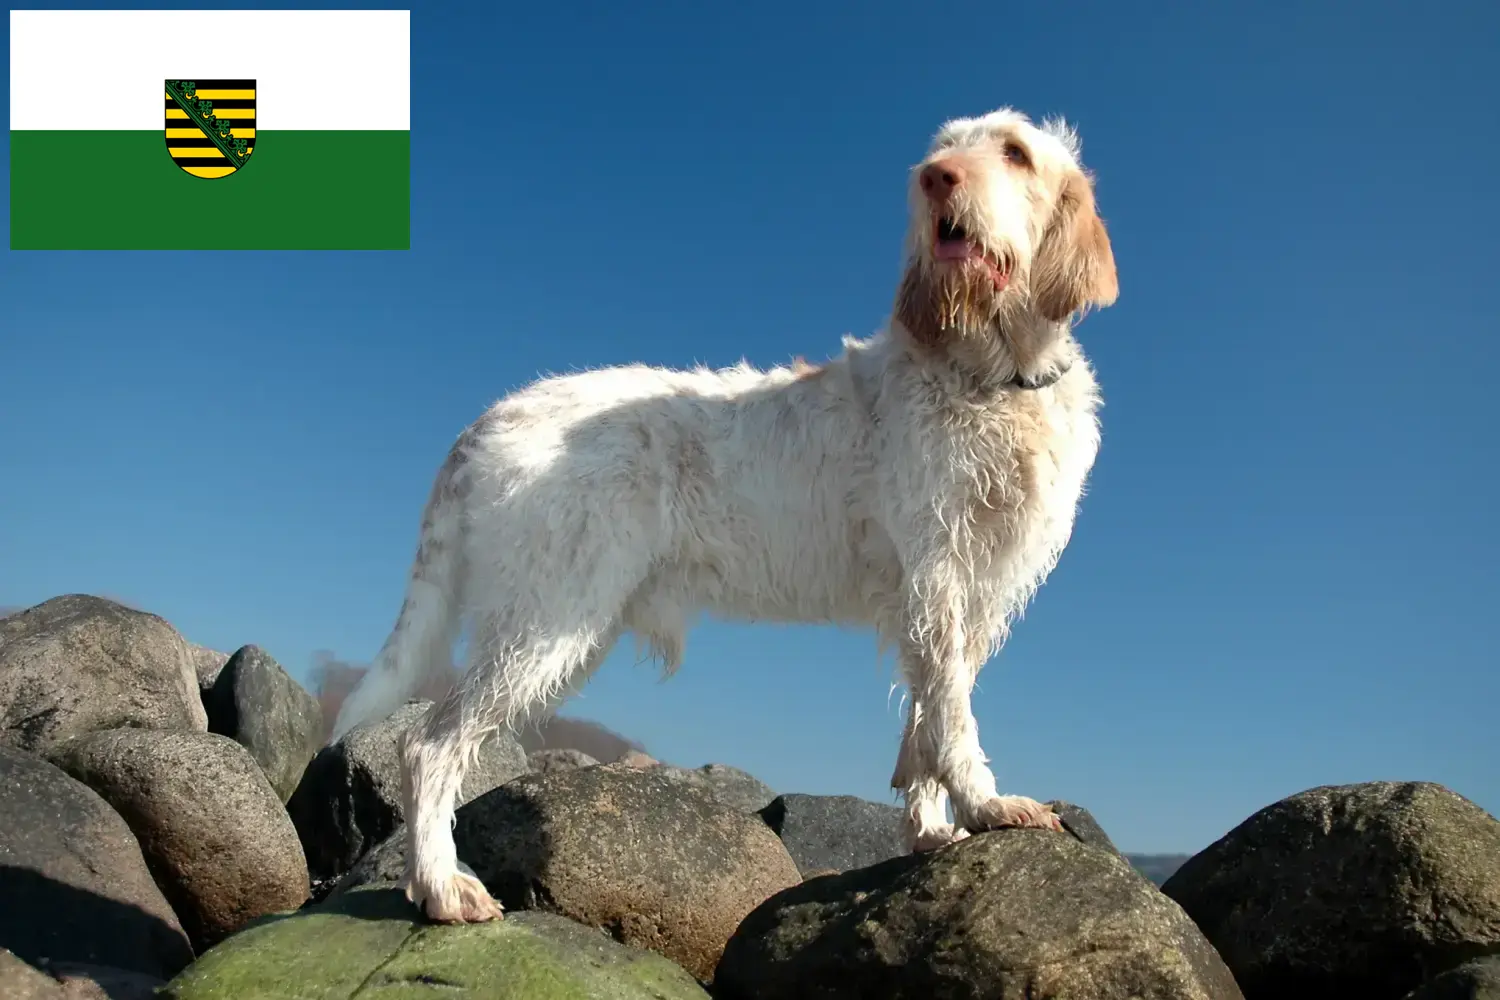 Read more about the article Spinone Italiano breeders and puppies in Saxony